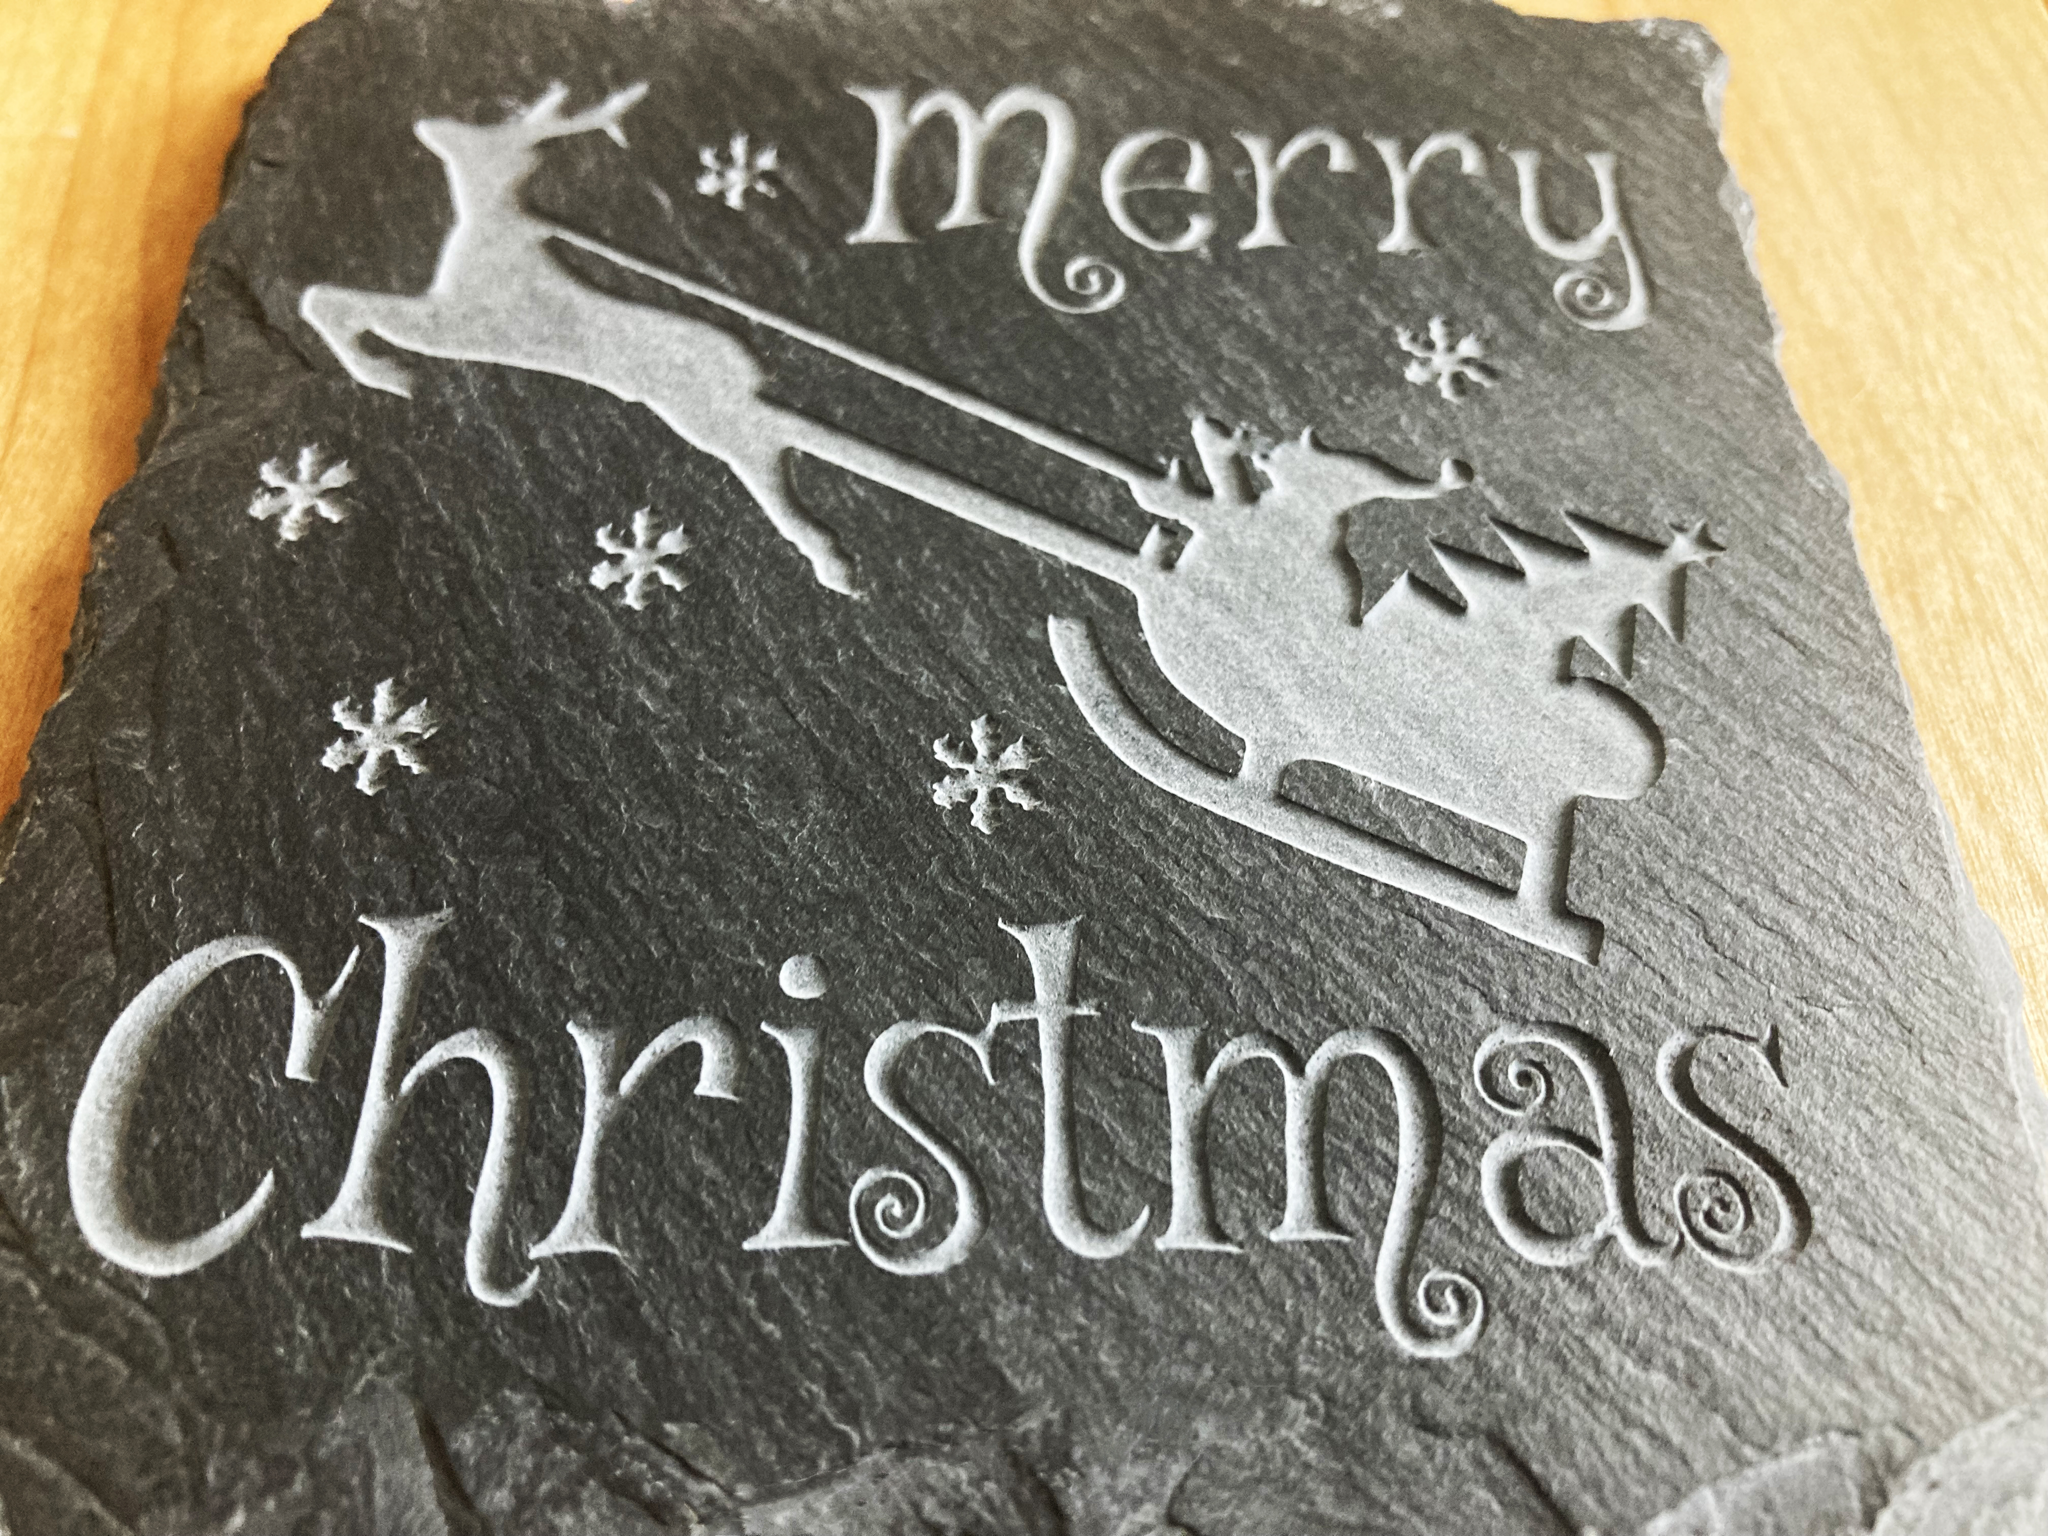 Merry Christmas Coaster. A great gift for the holidays. Get a set for entertaining guests.  Carved to a depth and quality that cannot be achieved with simple engraving.  Buy as a single, or mix and match in sets of 2 or 4.  Add a Coaster Holder and/or Gift Box. Each sold separately.